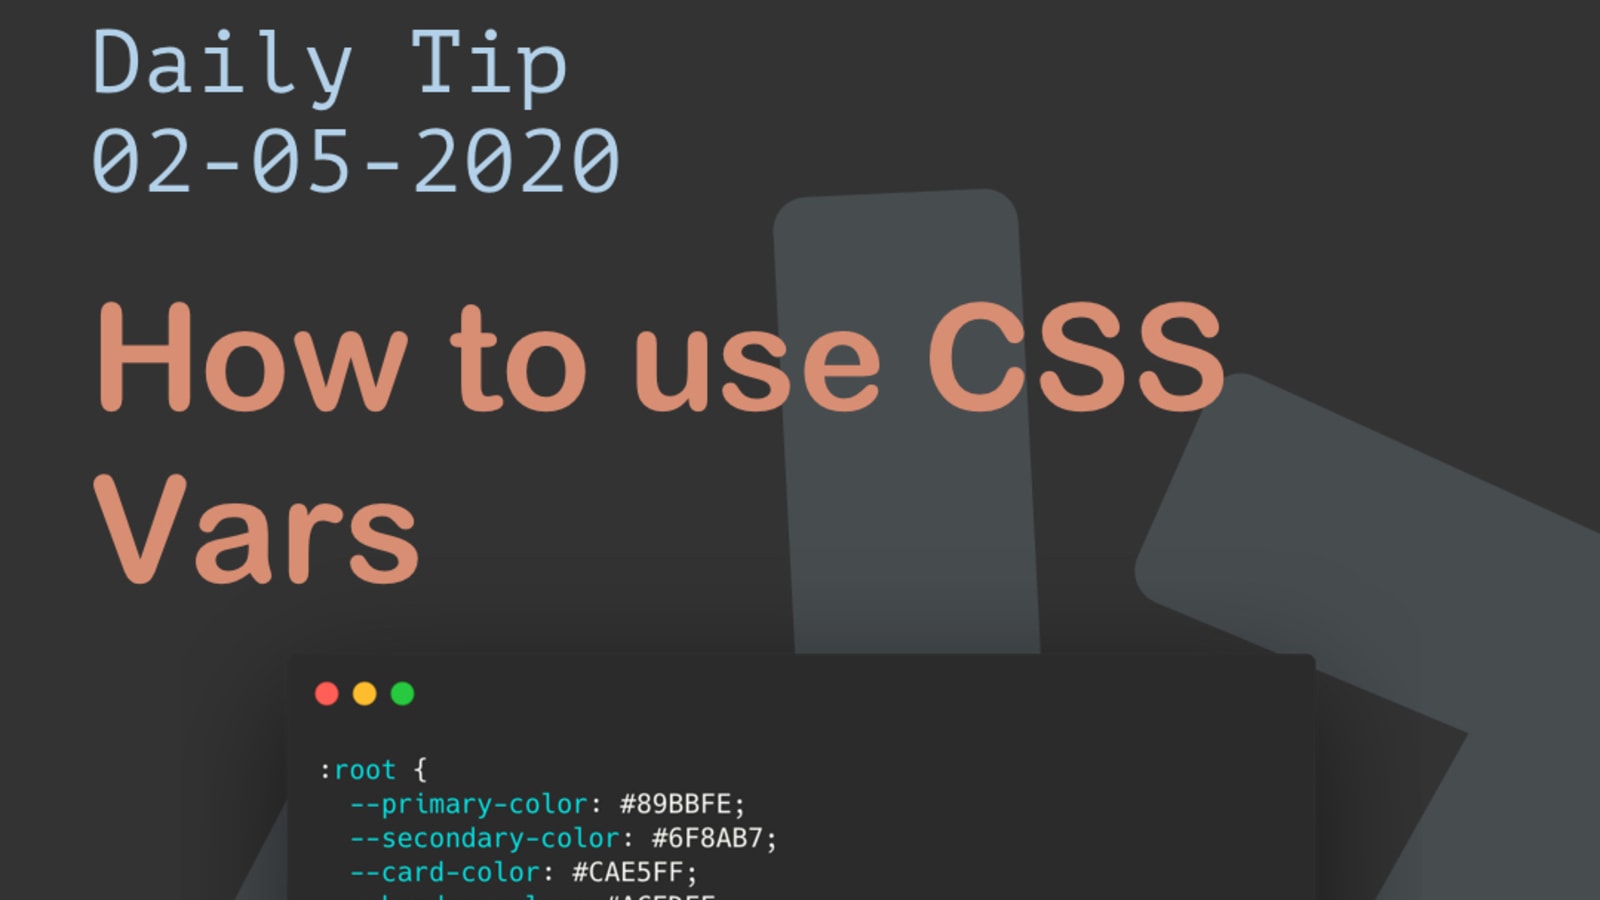 How to create a double border in CSS - LogRocket Blog